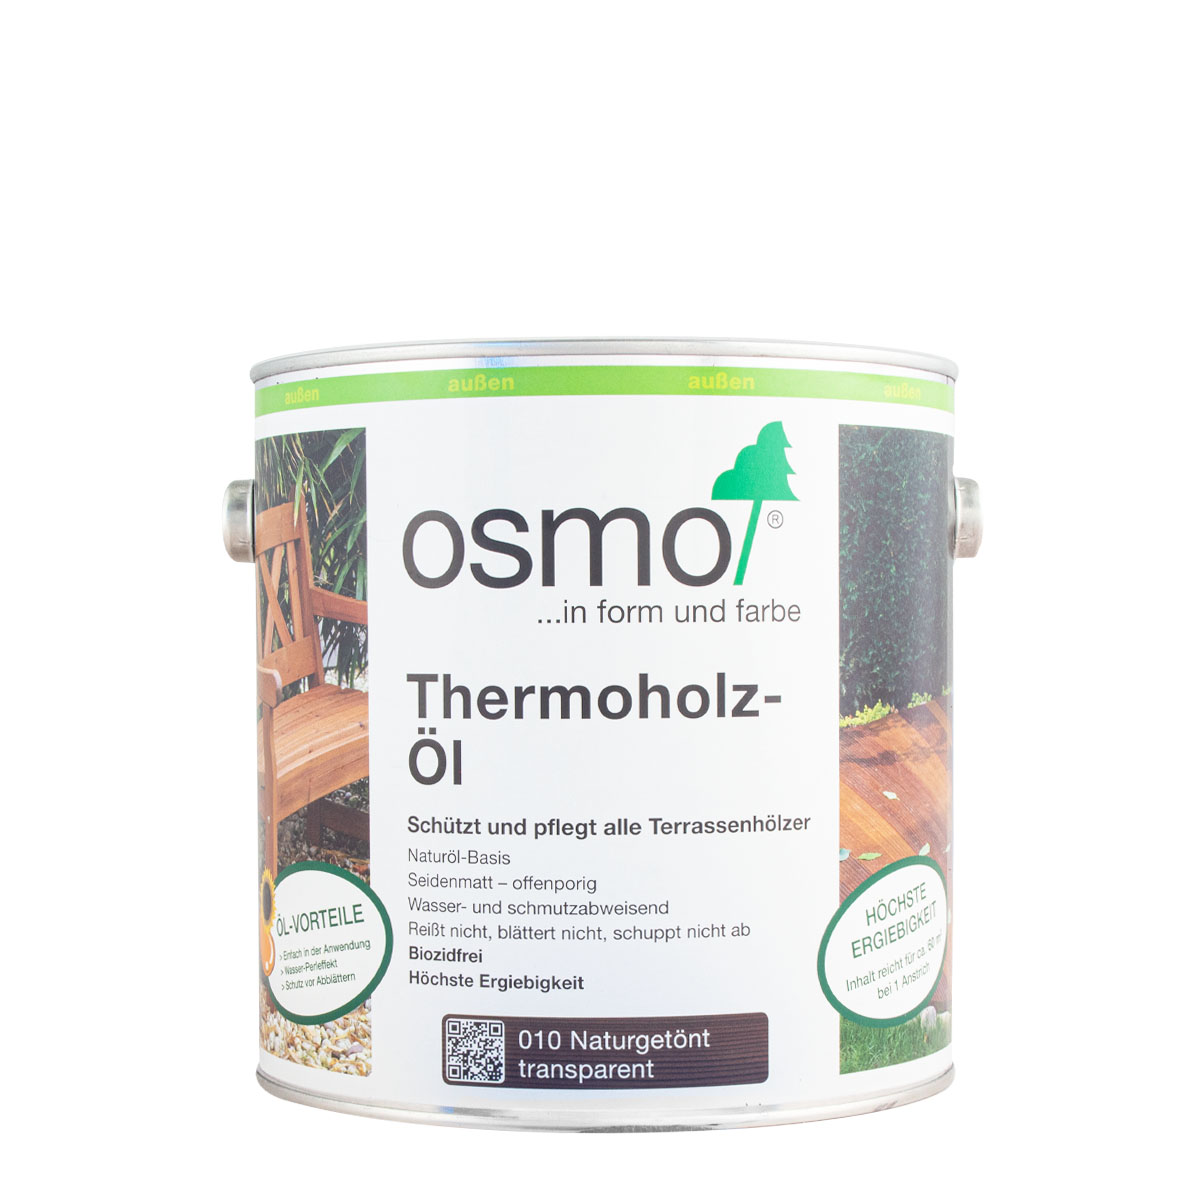 osmo_thermoholz-oel_gross